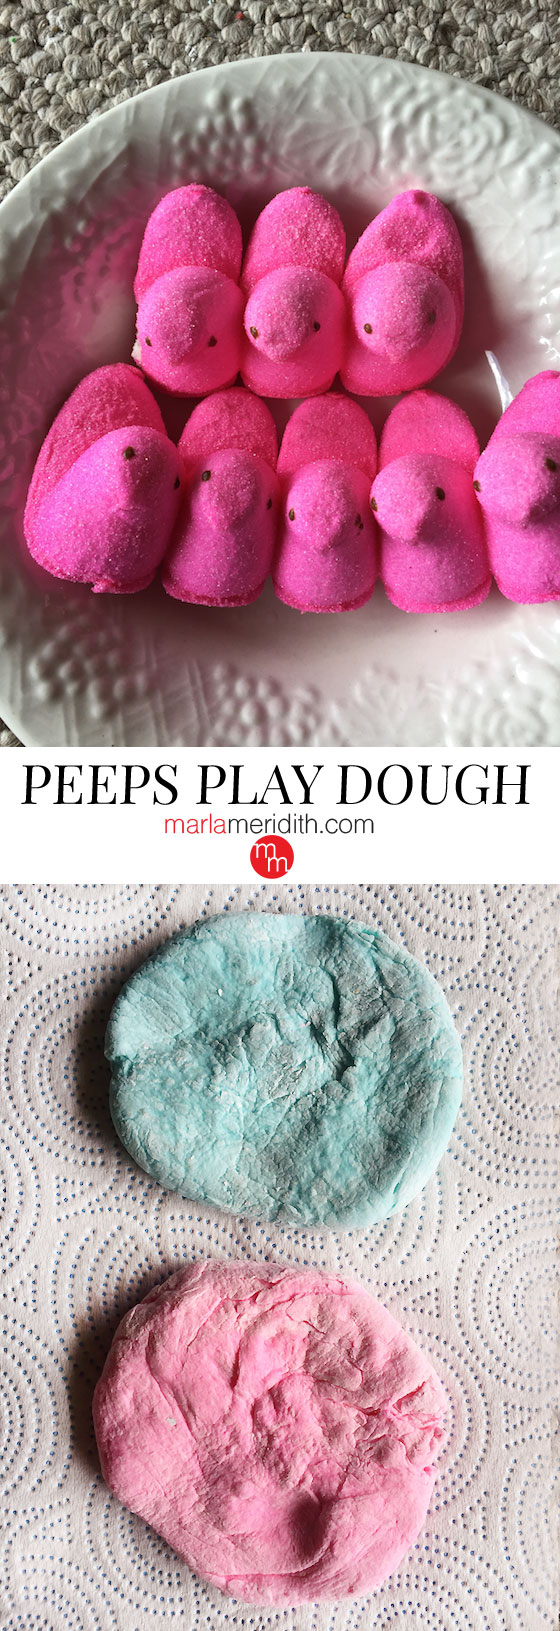 How-To make Peeps Play Dough! Your kids will love this easy, fun & silly craft for #Easter | MarlaMeridith.com